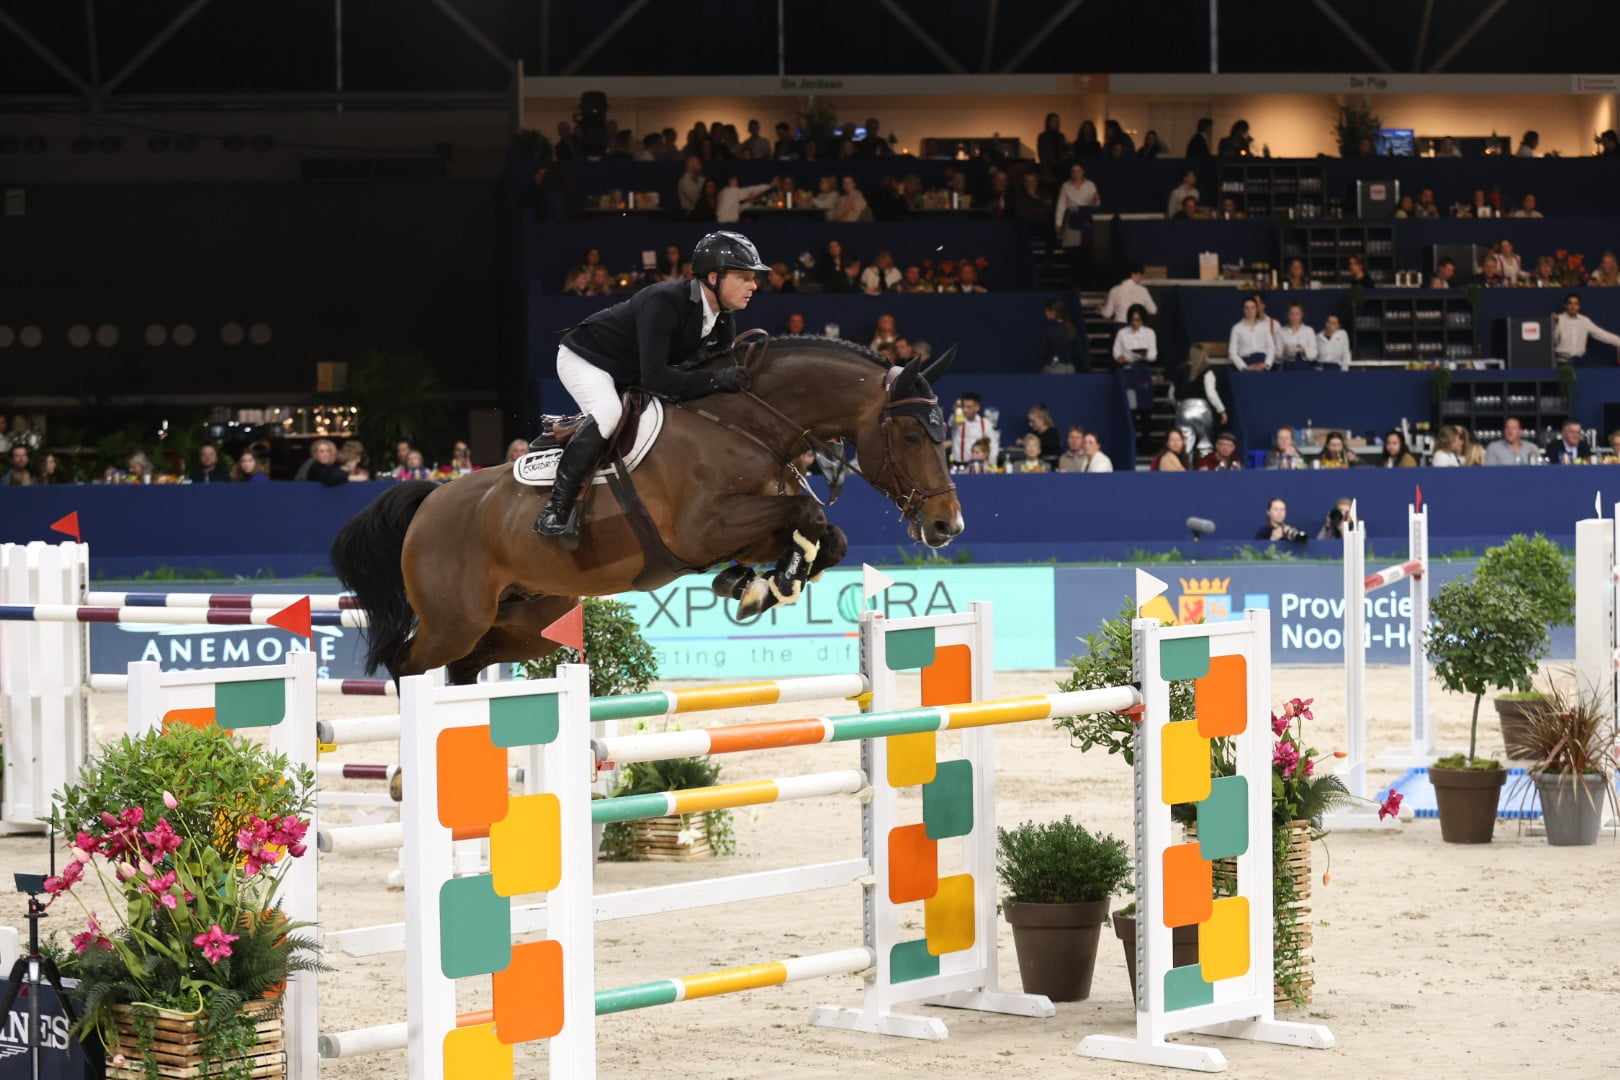 Willem Greve and Mees Vd Watermolen best in Lövsta Future Challenge Young Horses at Gothenburg Horse Show